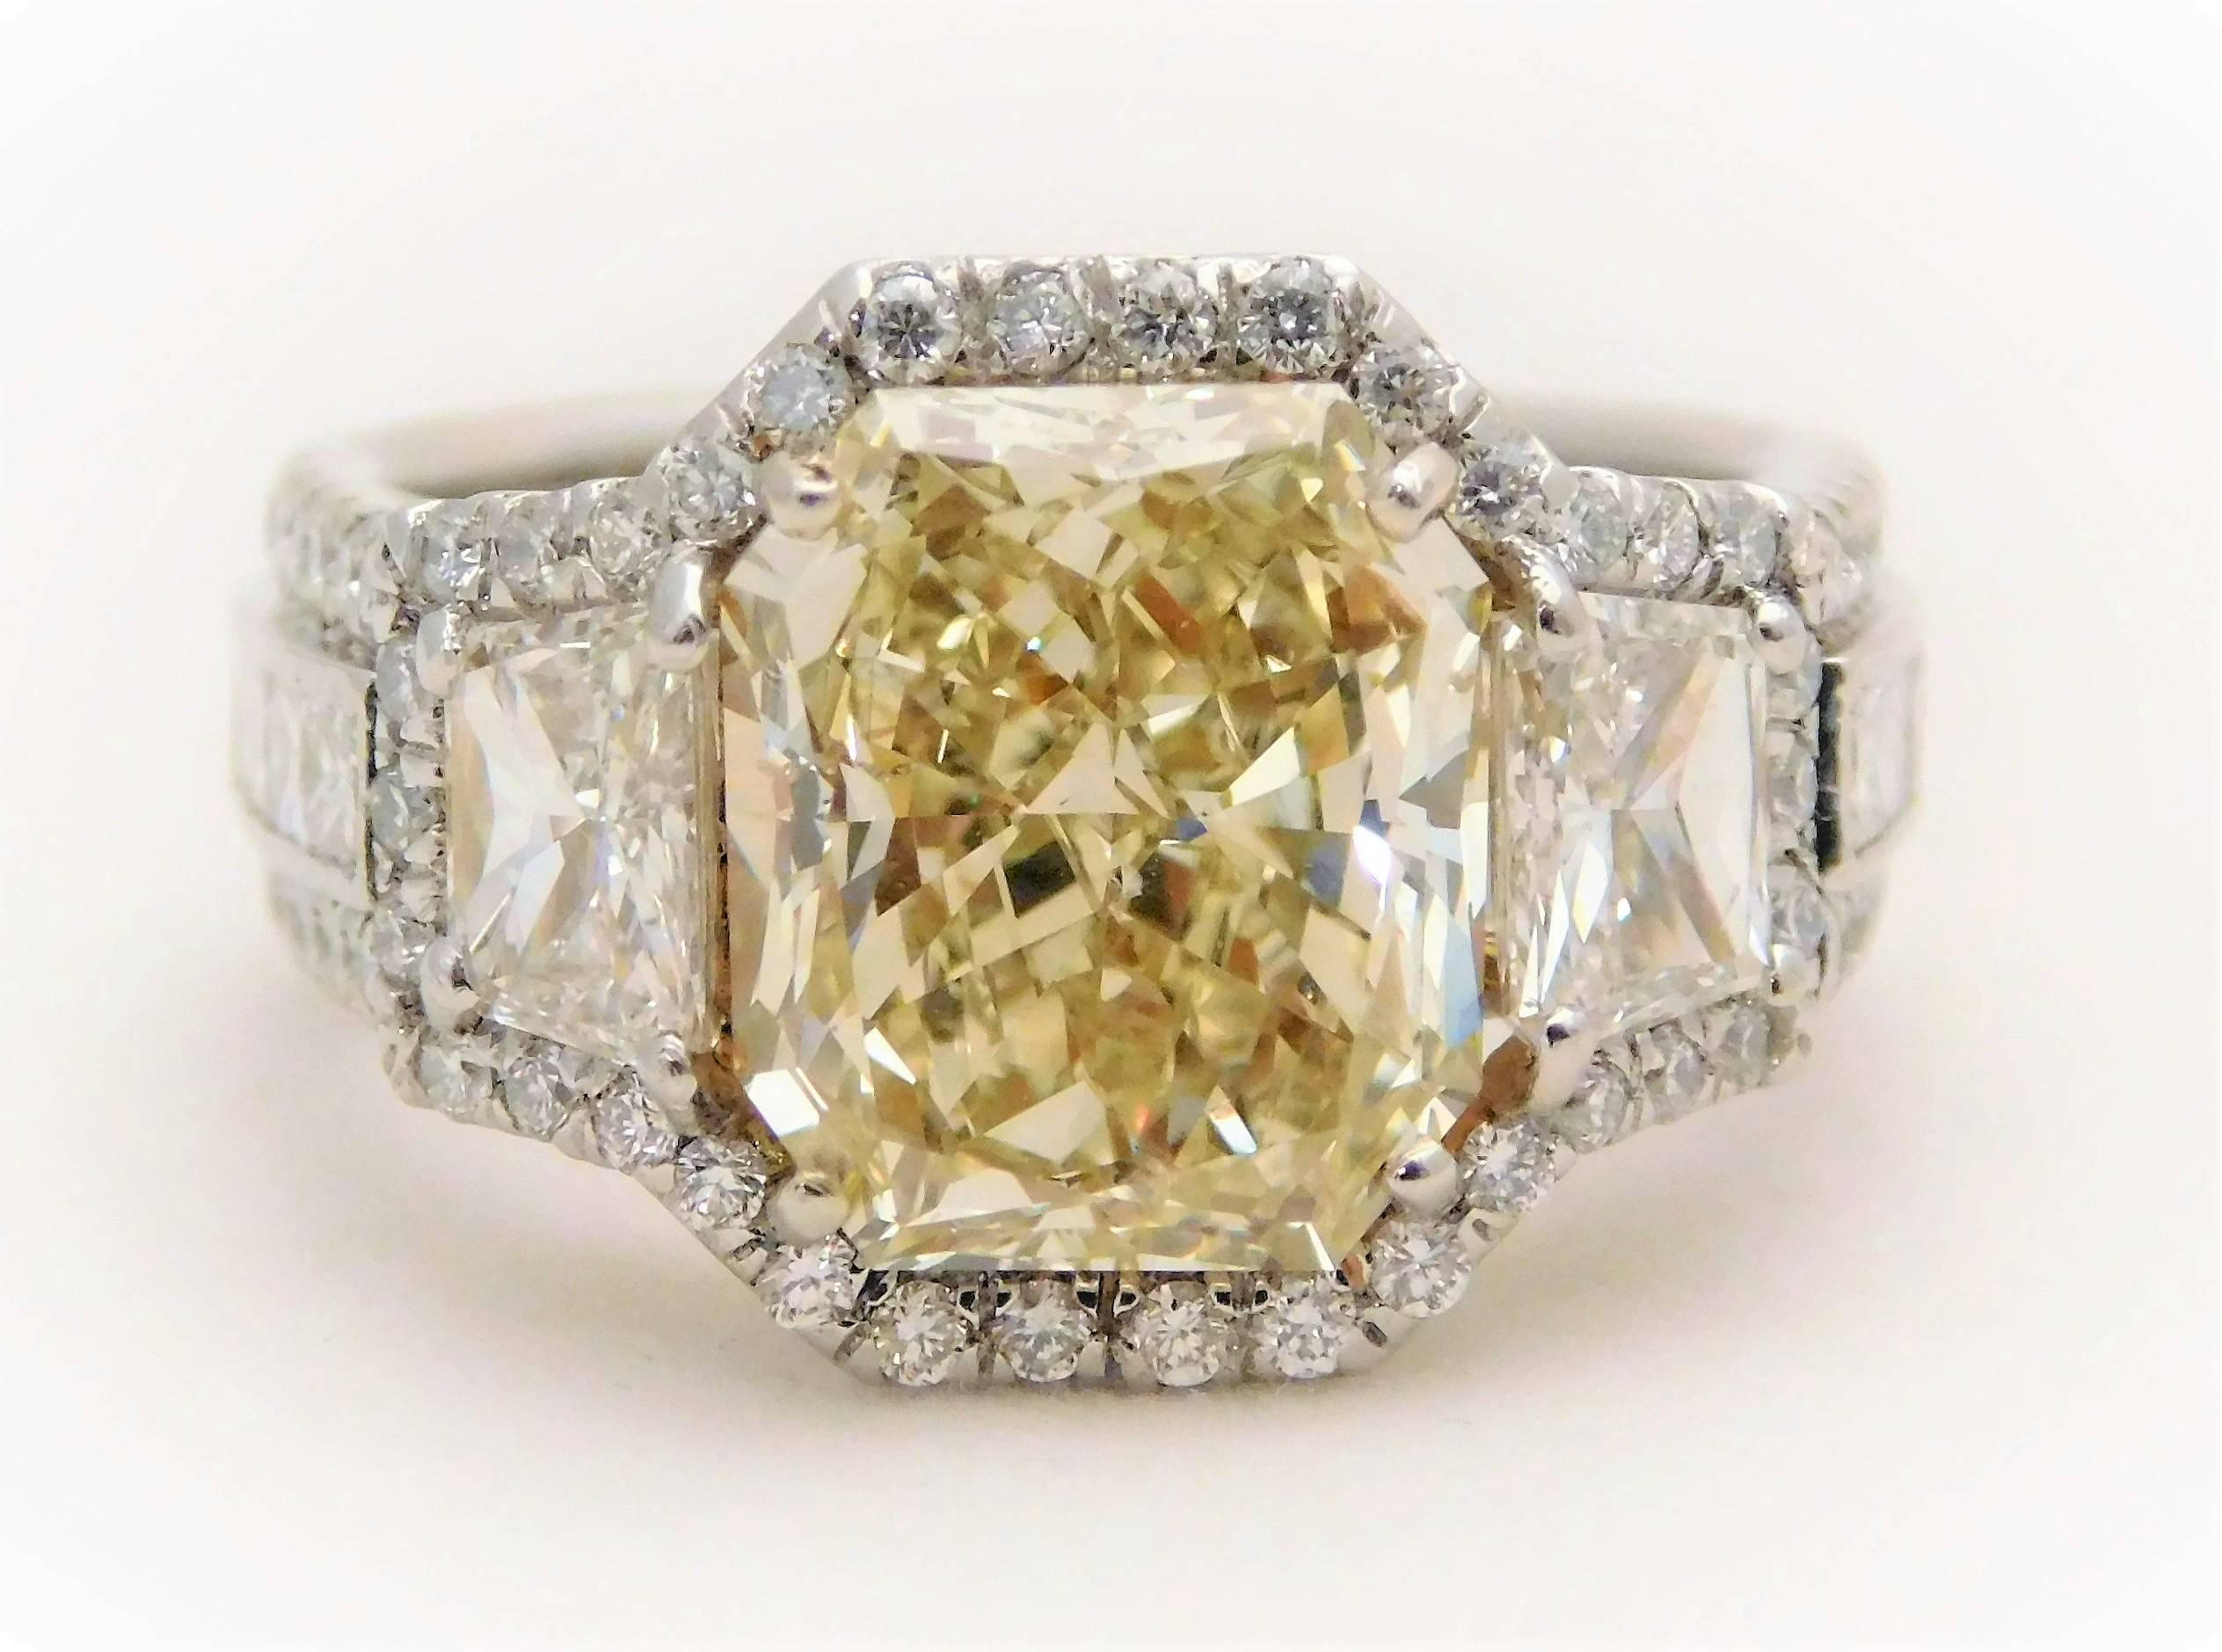 Circa 2018.  Handcrafted in solid platinum, this spectacular ring is a true work of art.  It has been masterfully jeweled with a GIA certified(#2145168278) 4.07ct Natural fancy yellow diamond as its dazzling center stone.  Flanking this rare diamond